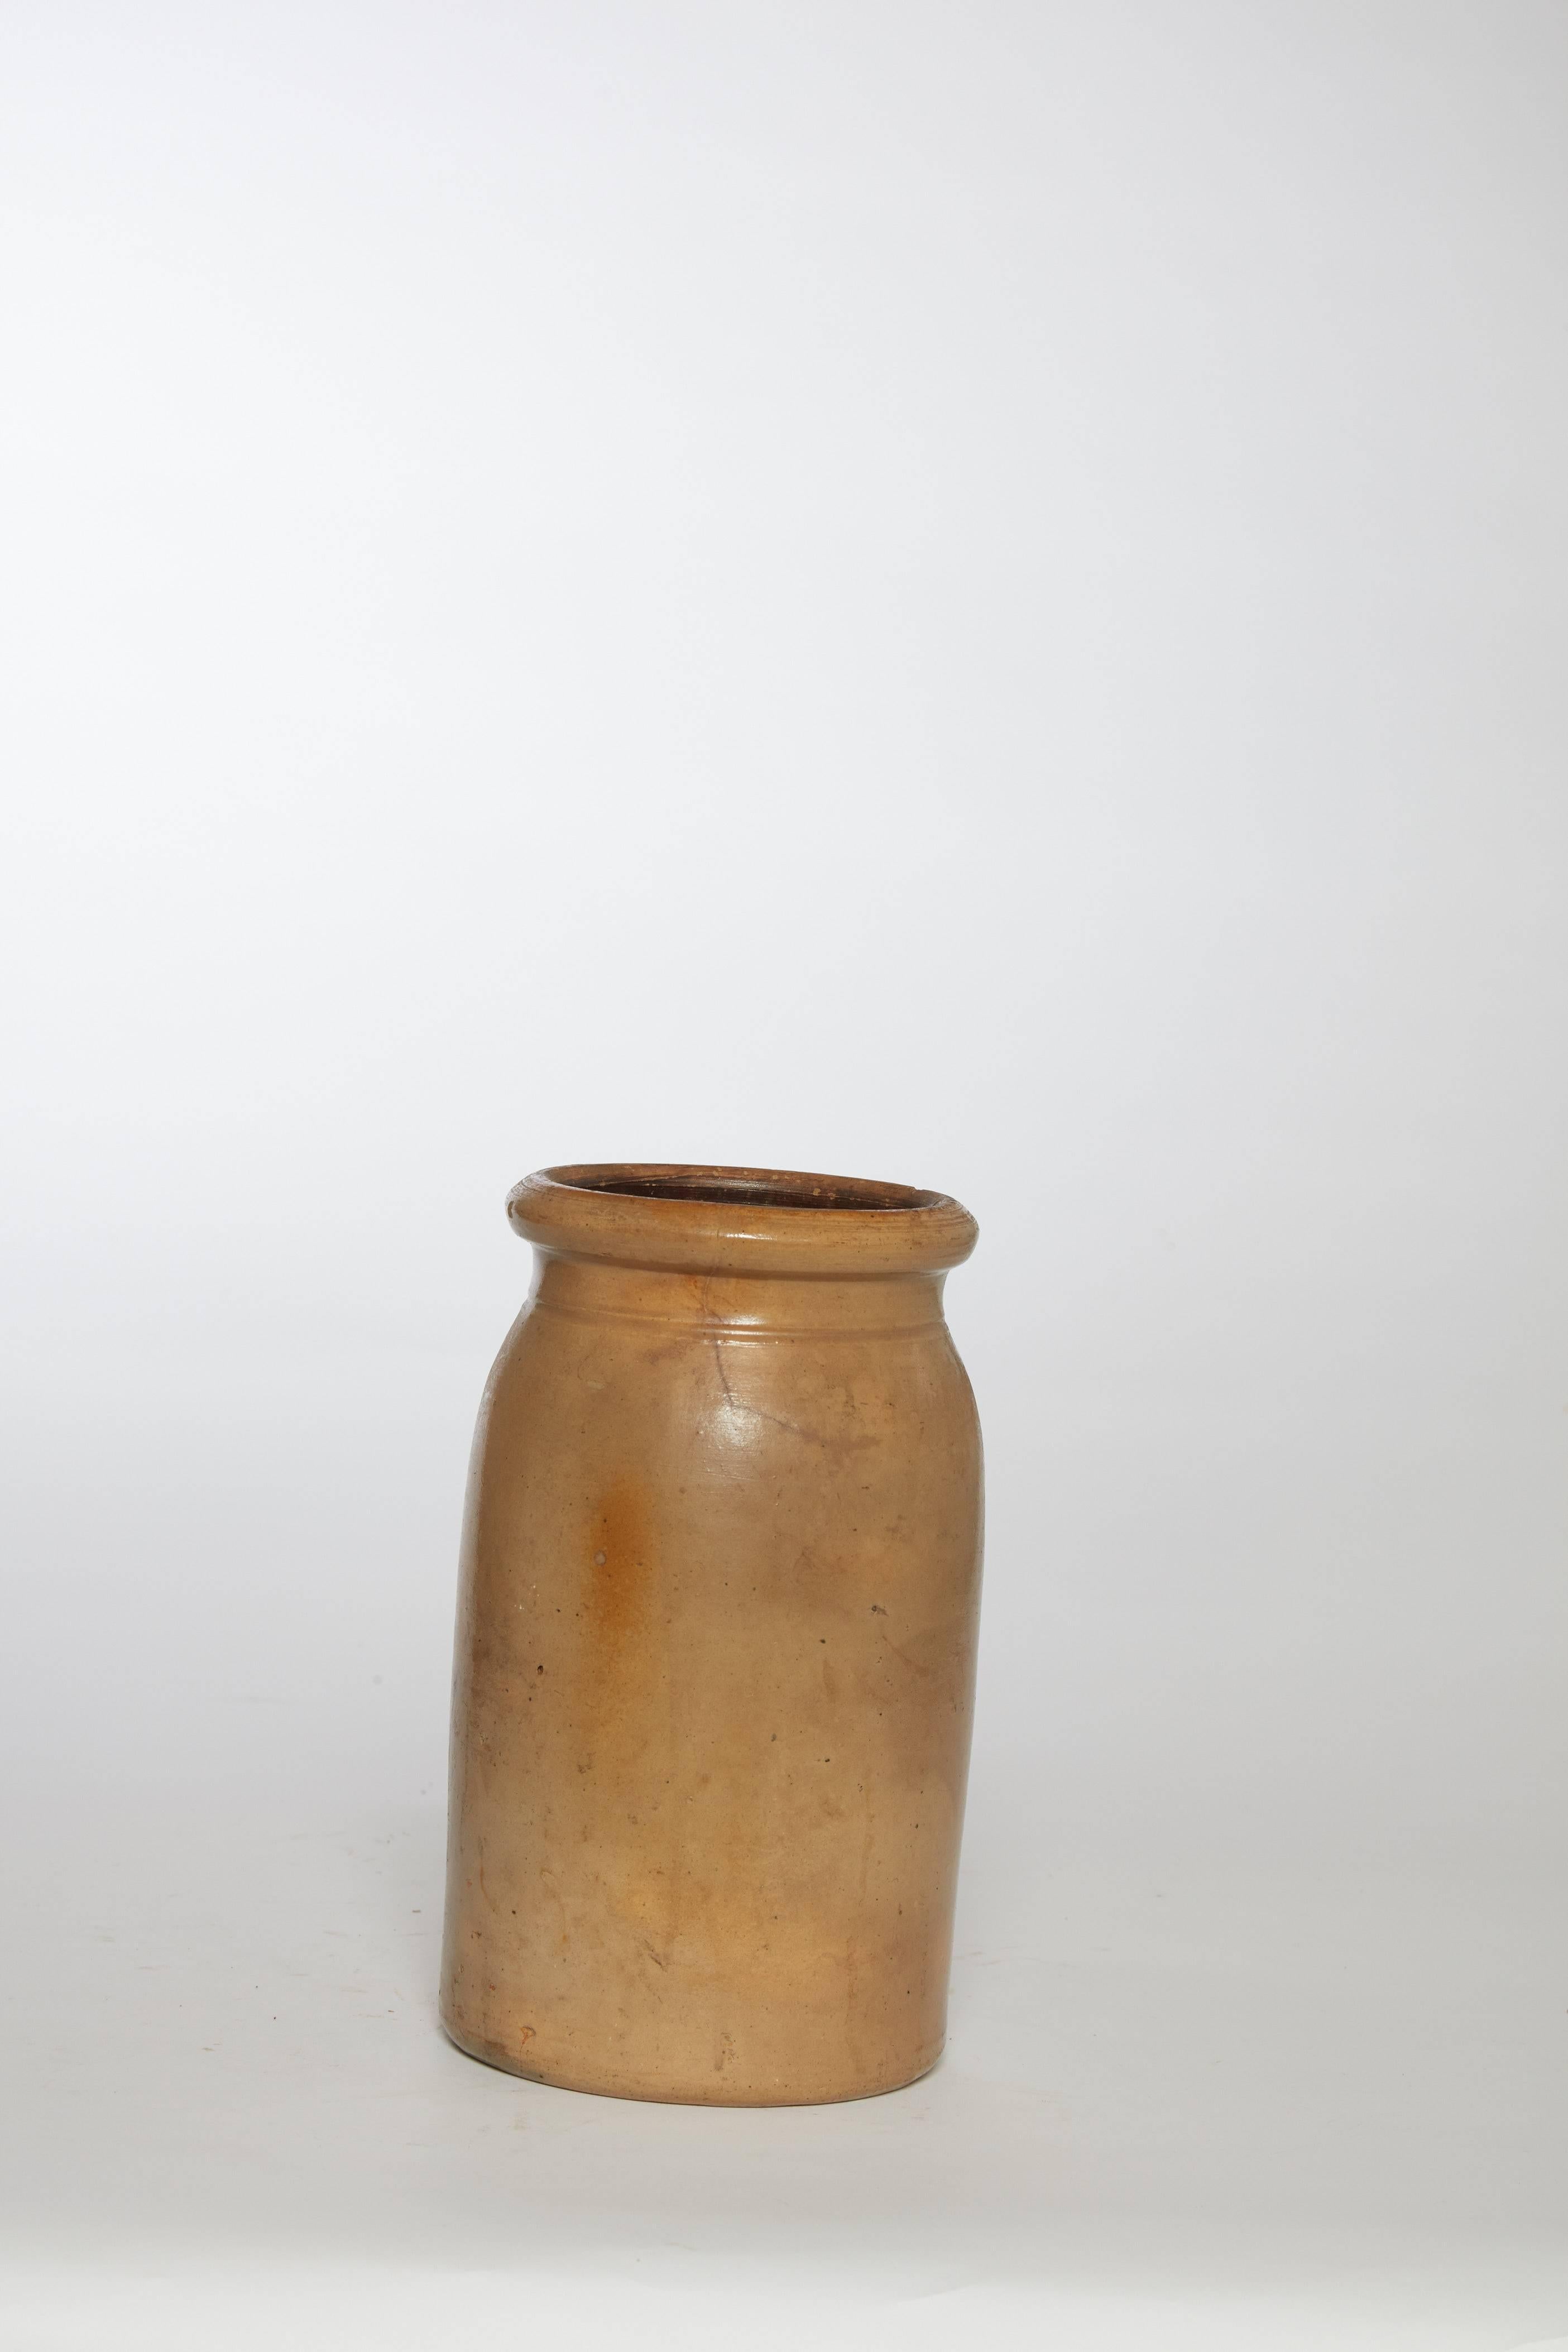 Early 20th century American extra large canning jar.